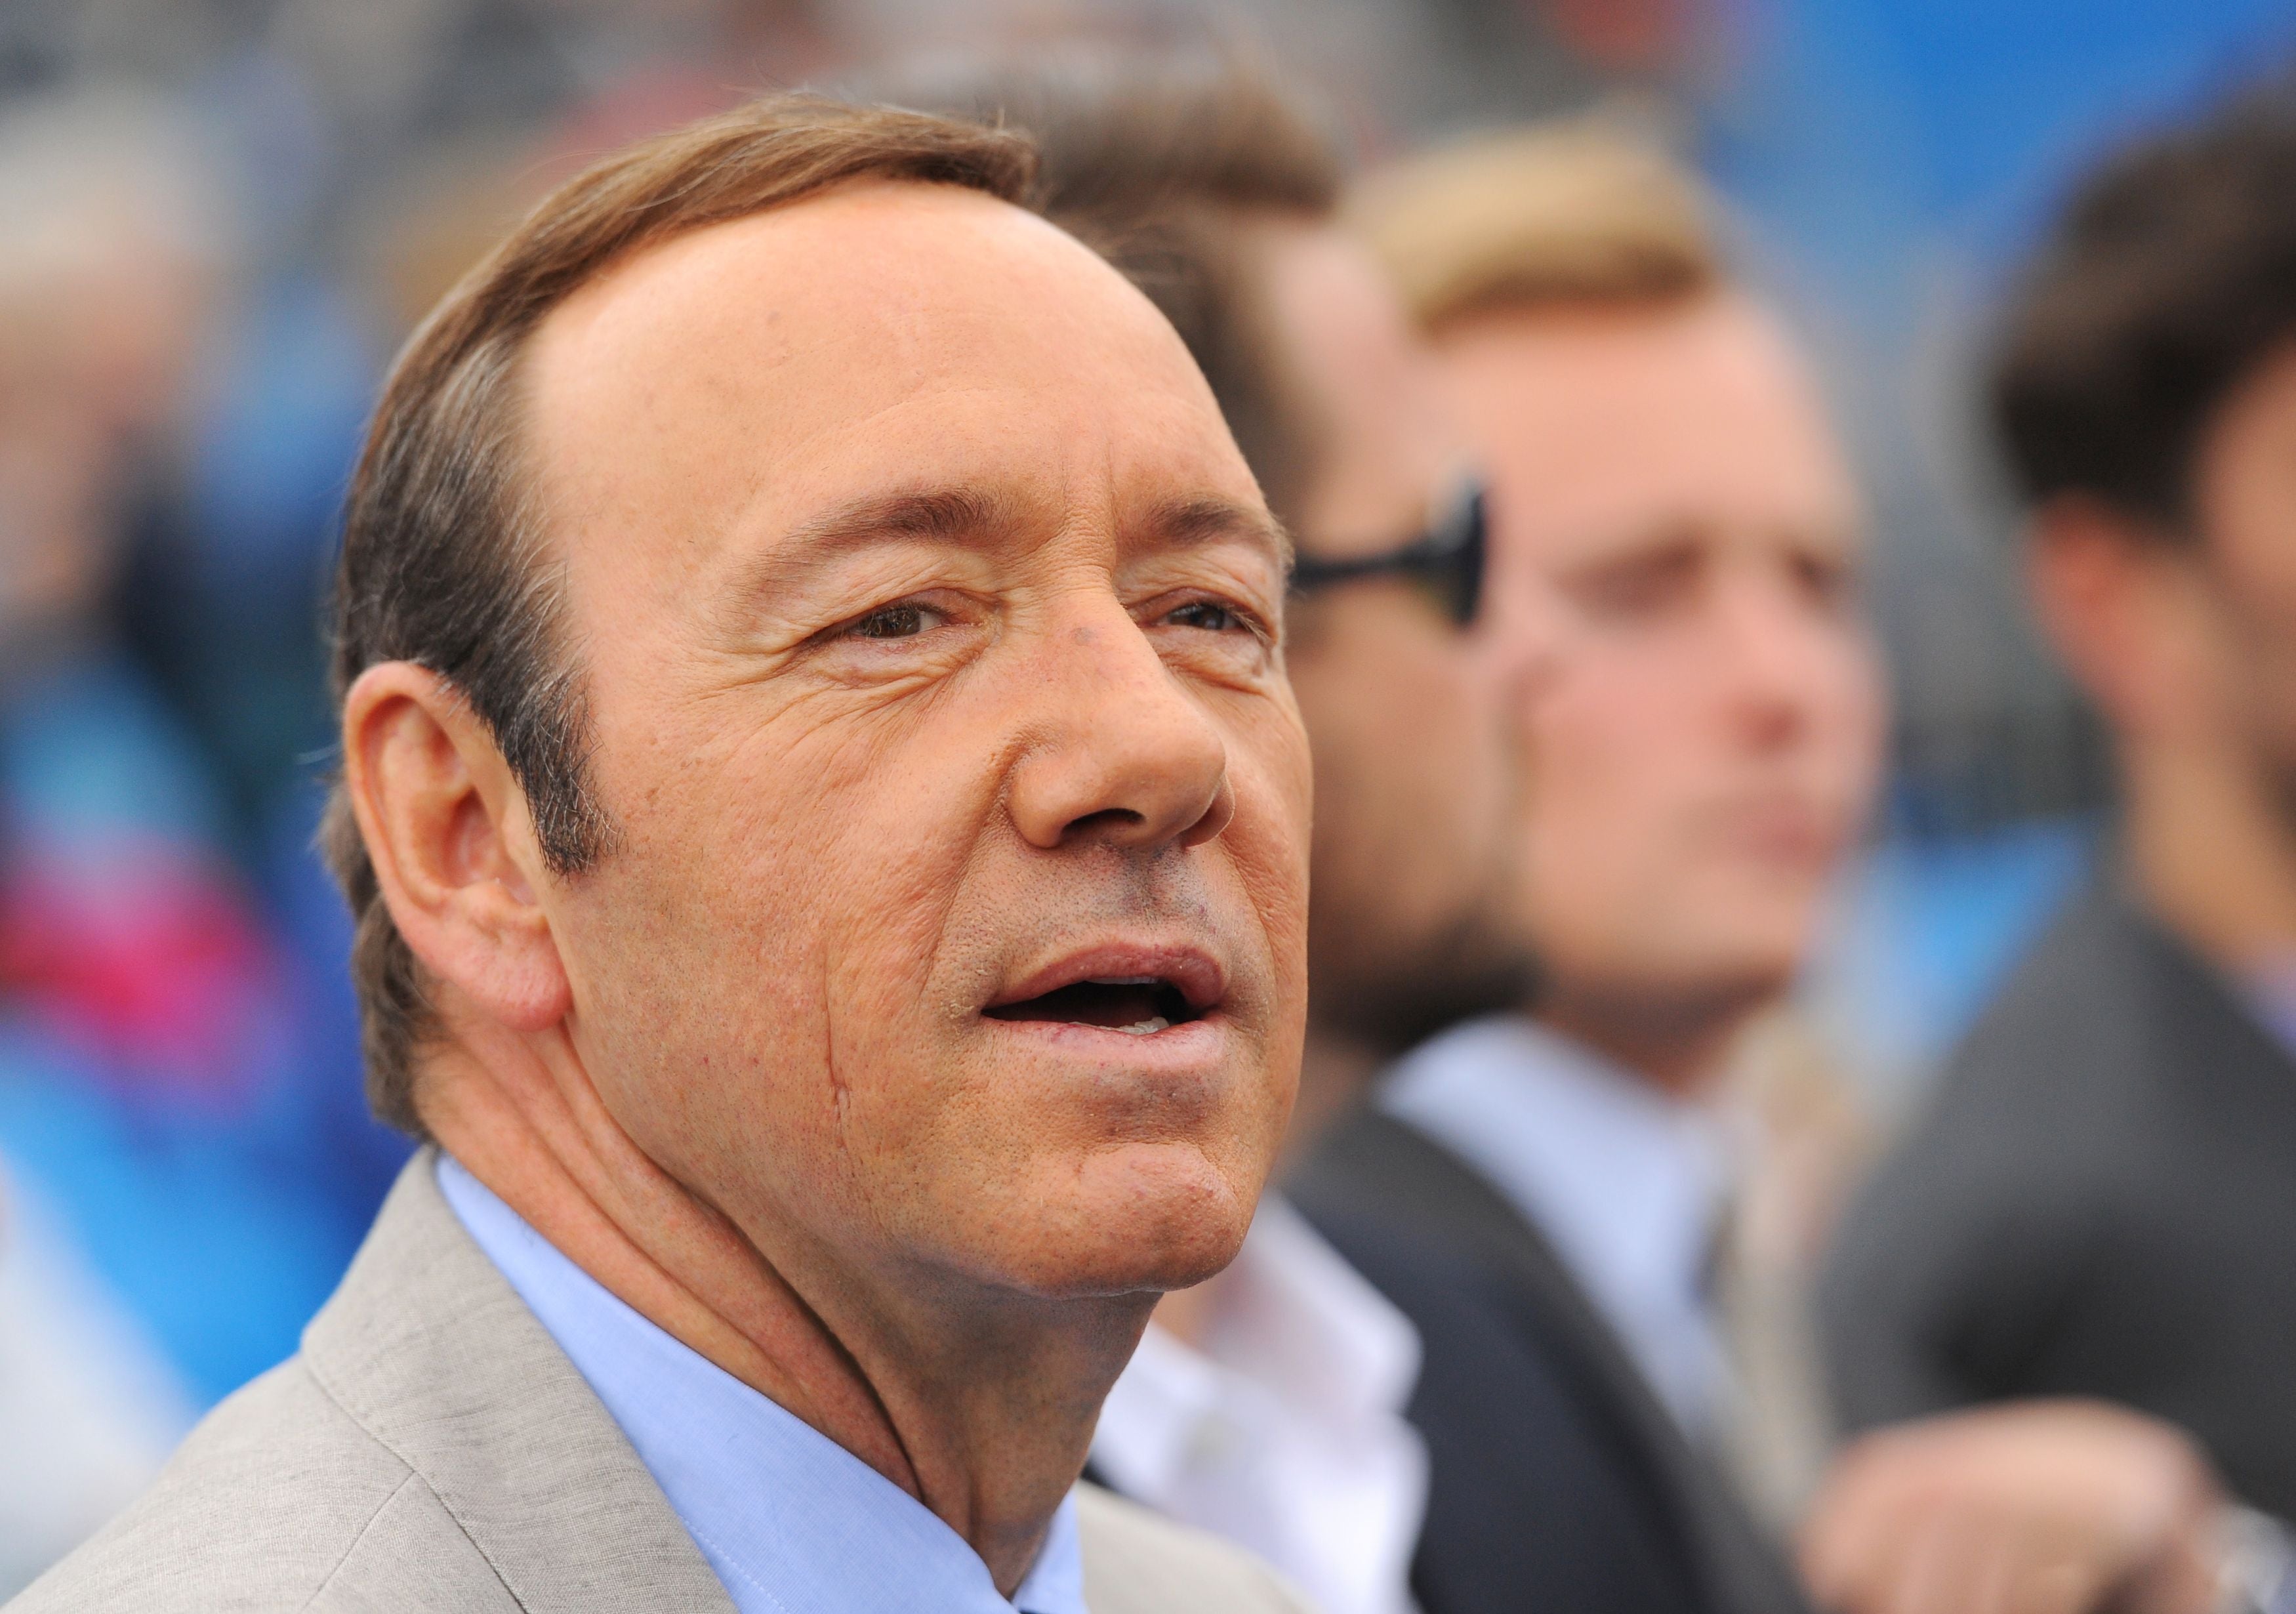 Actor Kevin Spacey has been charged with sexual offences against three men, the Metropolitan Police has announced. (Dominic Lipinski/PA)